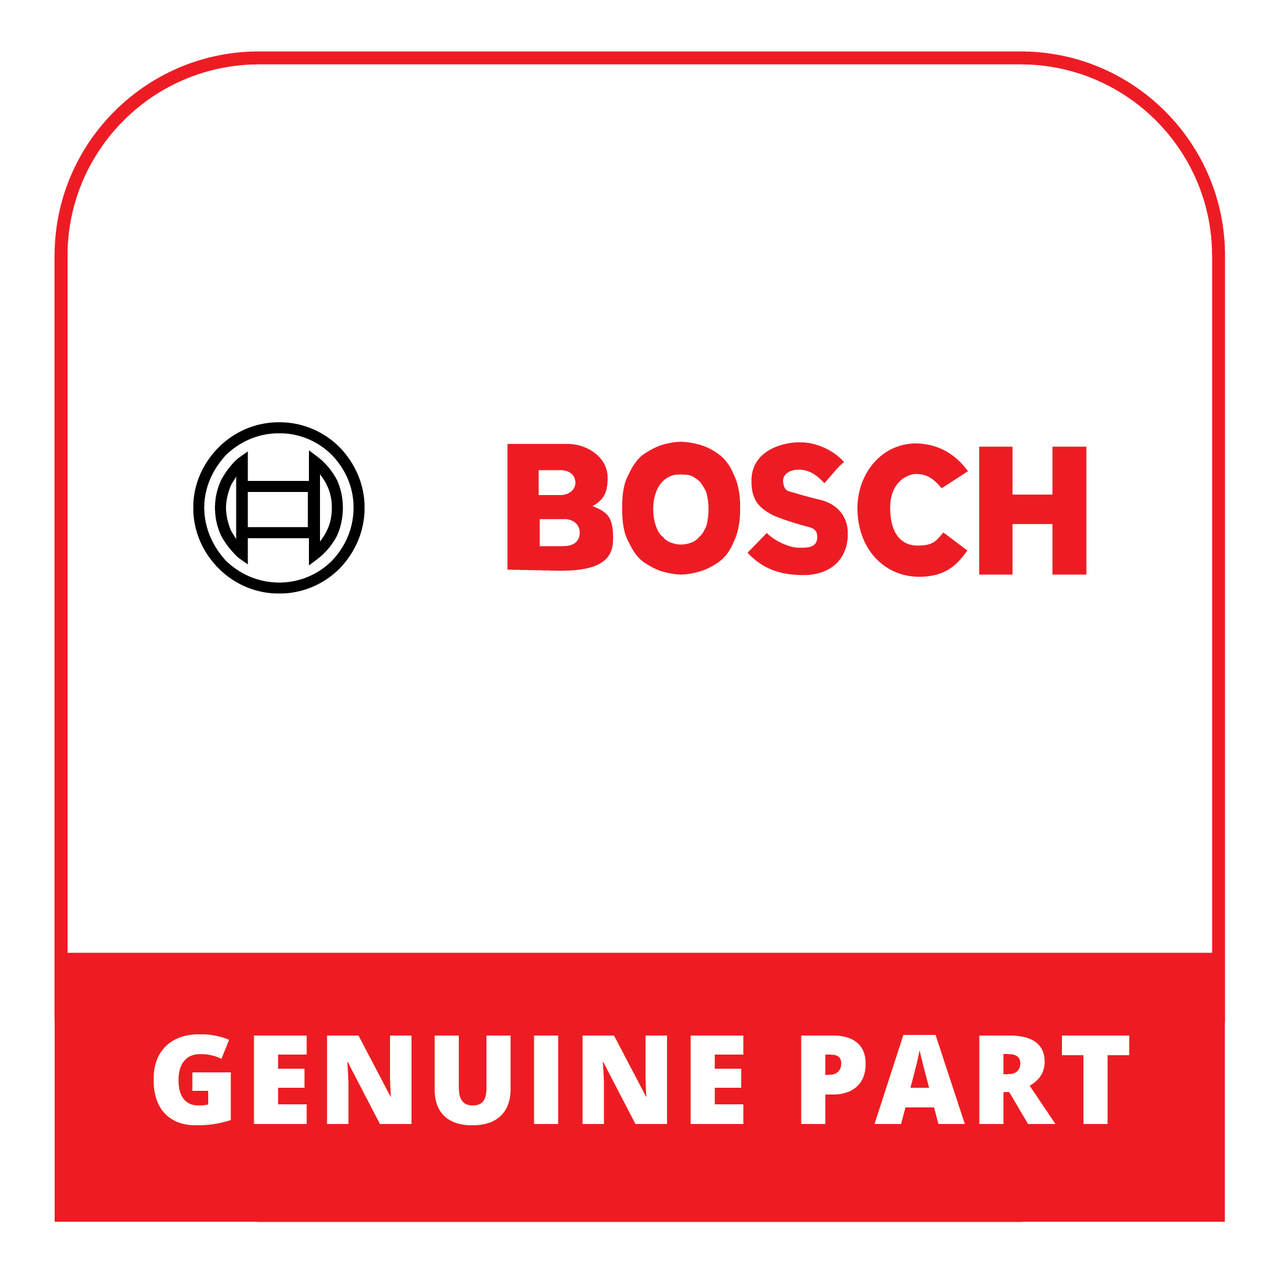 Bosch (Thermador) 12008583 - Sealing - Genuine Bosch (Thermador) Part